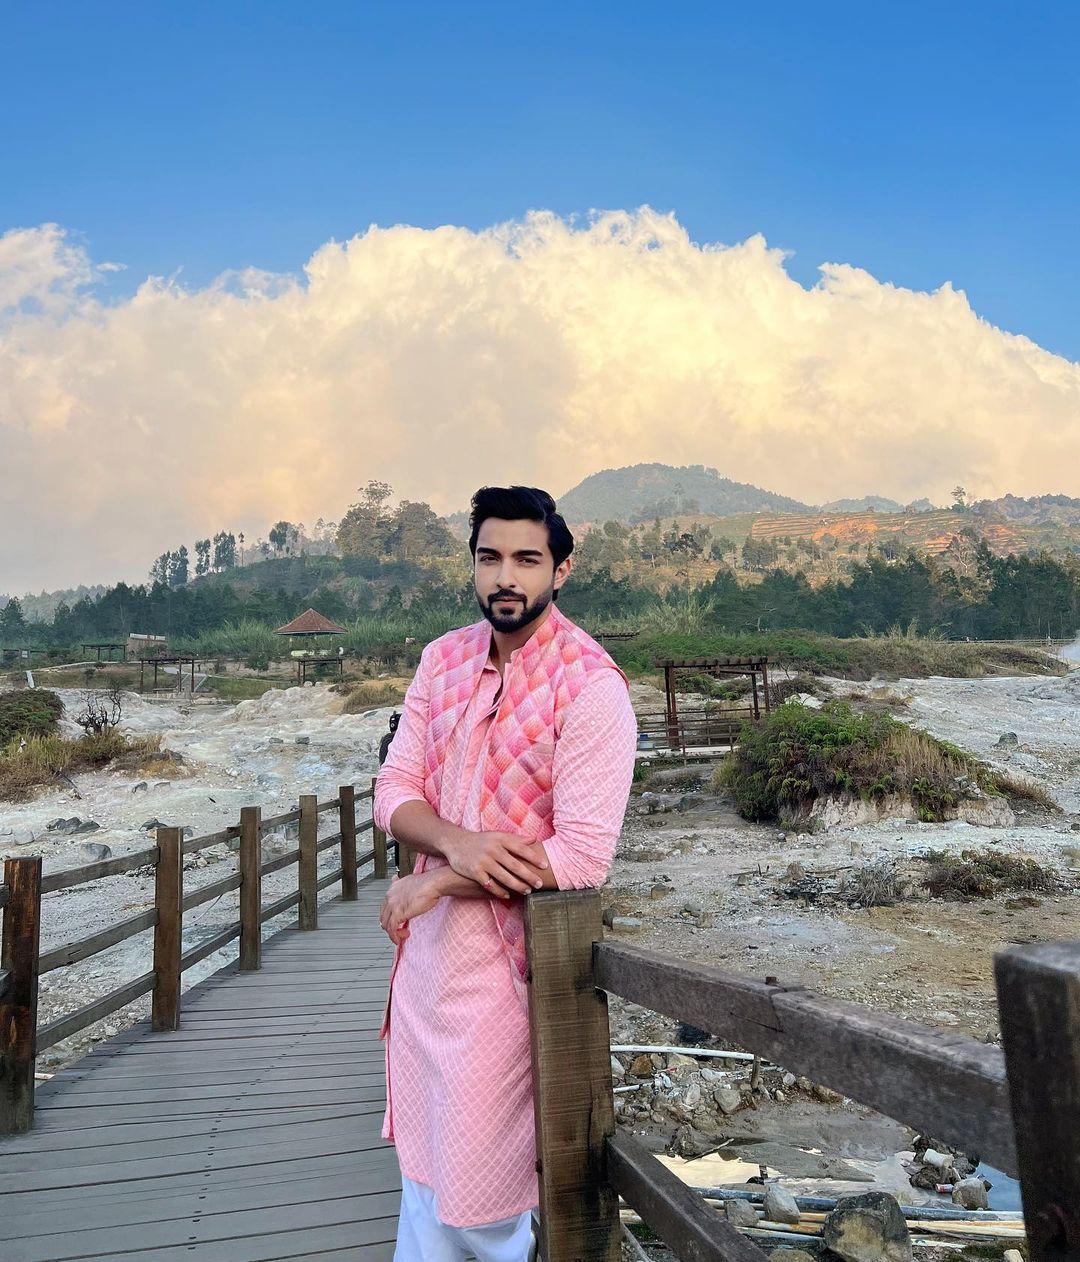 Dear boys, who said pink is just for girls? Take a look at Rohit's hot avatar and take some cues